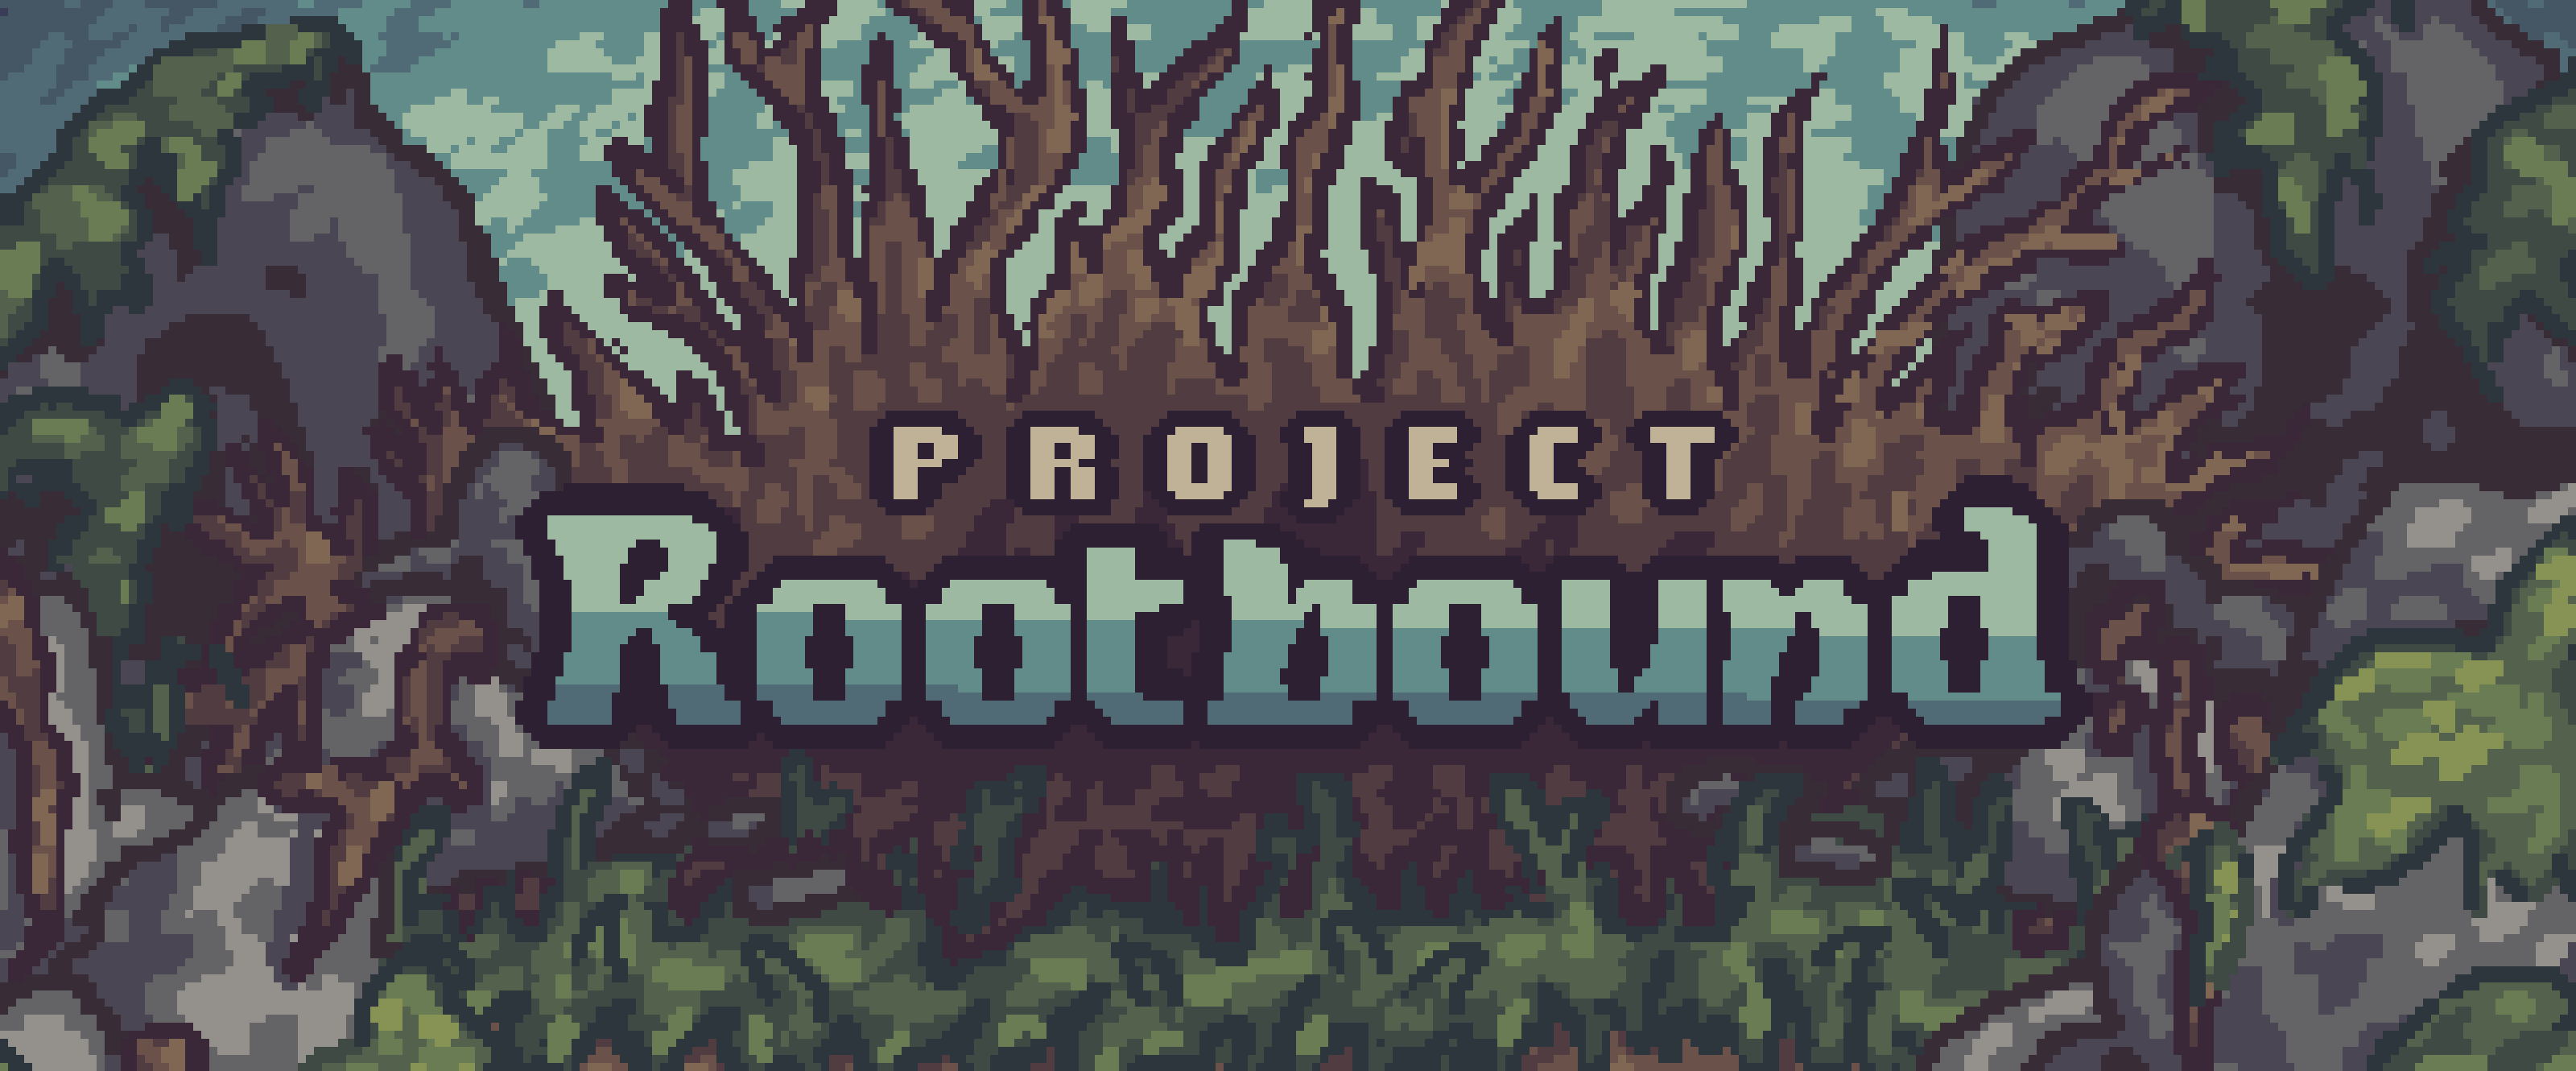 Project Rootbound